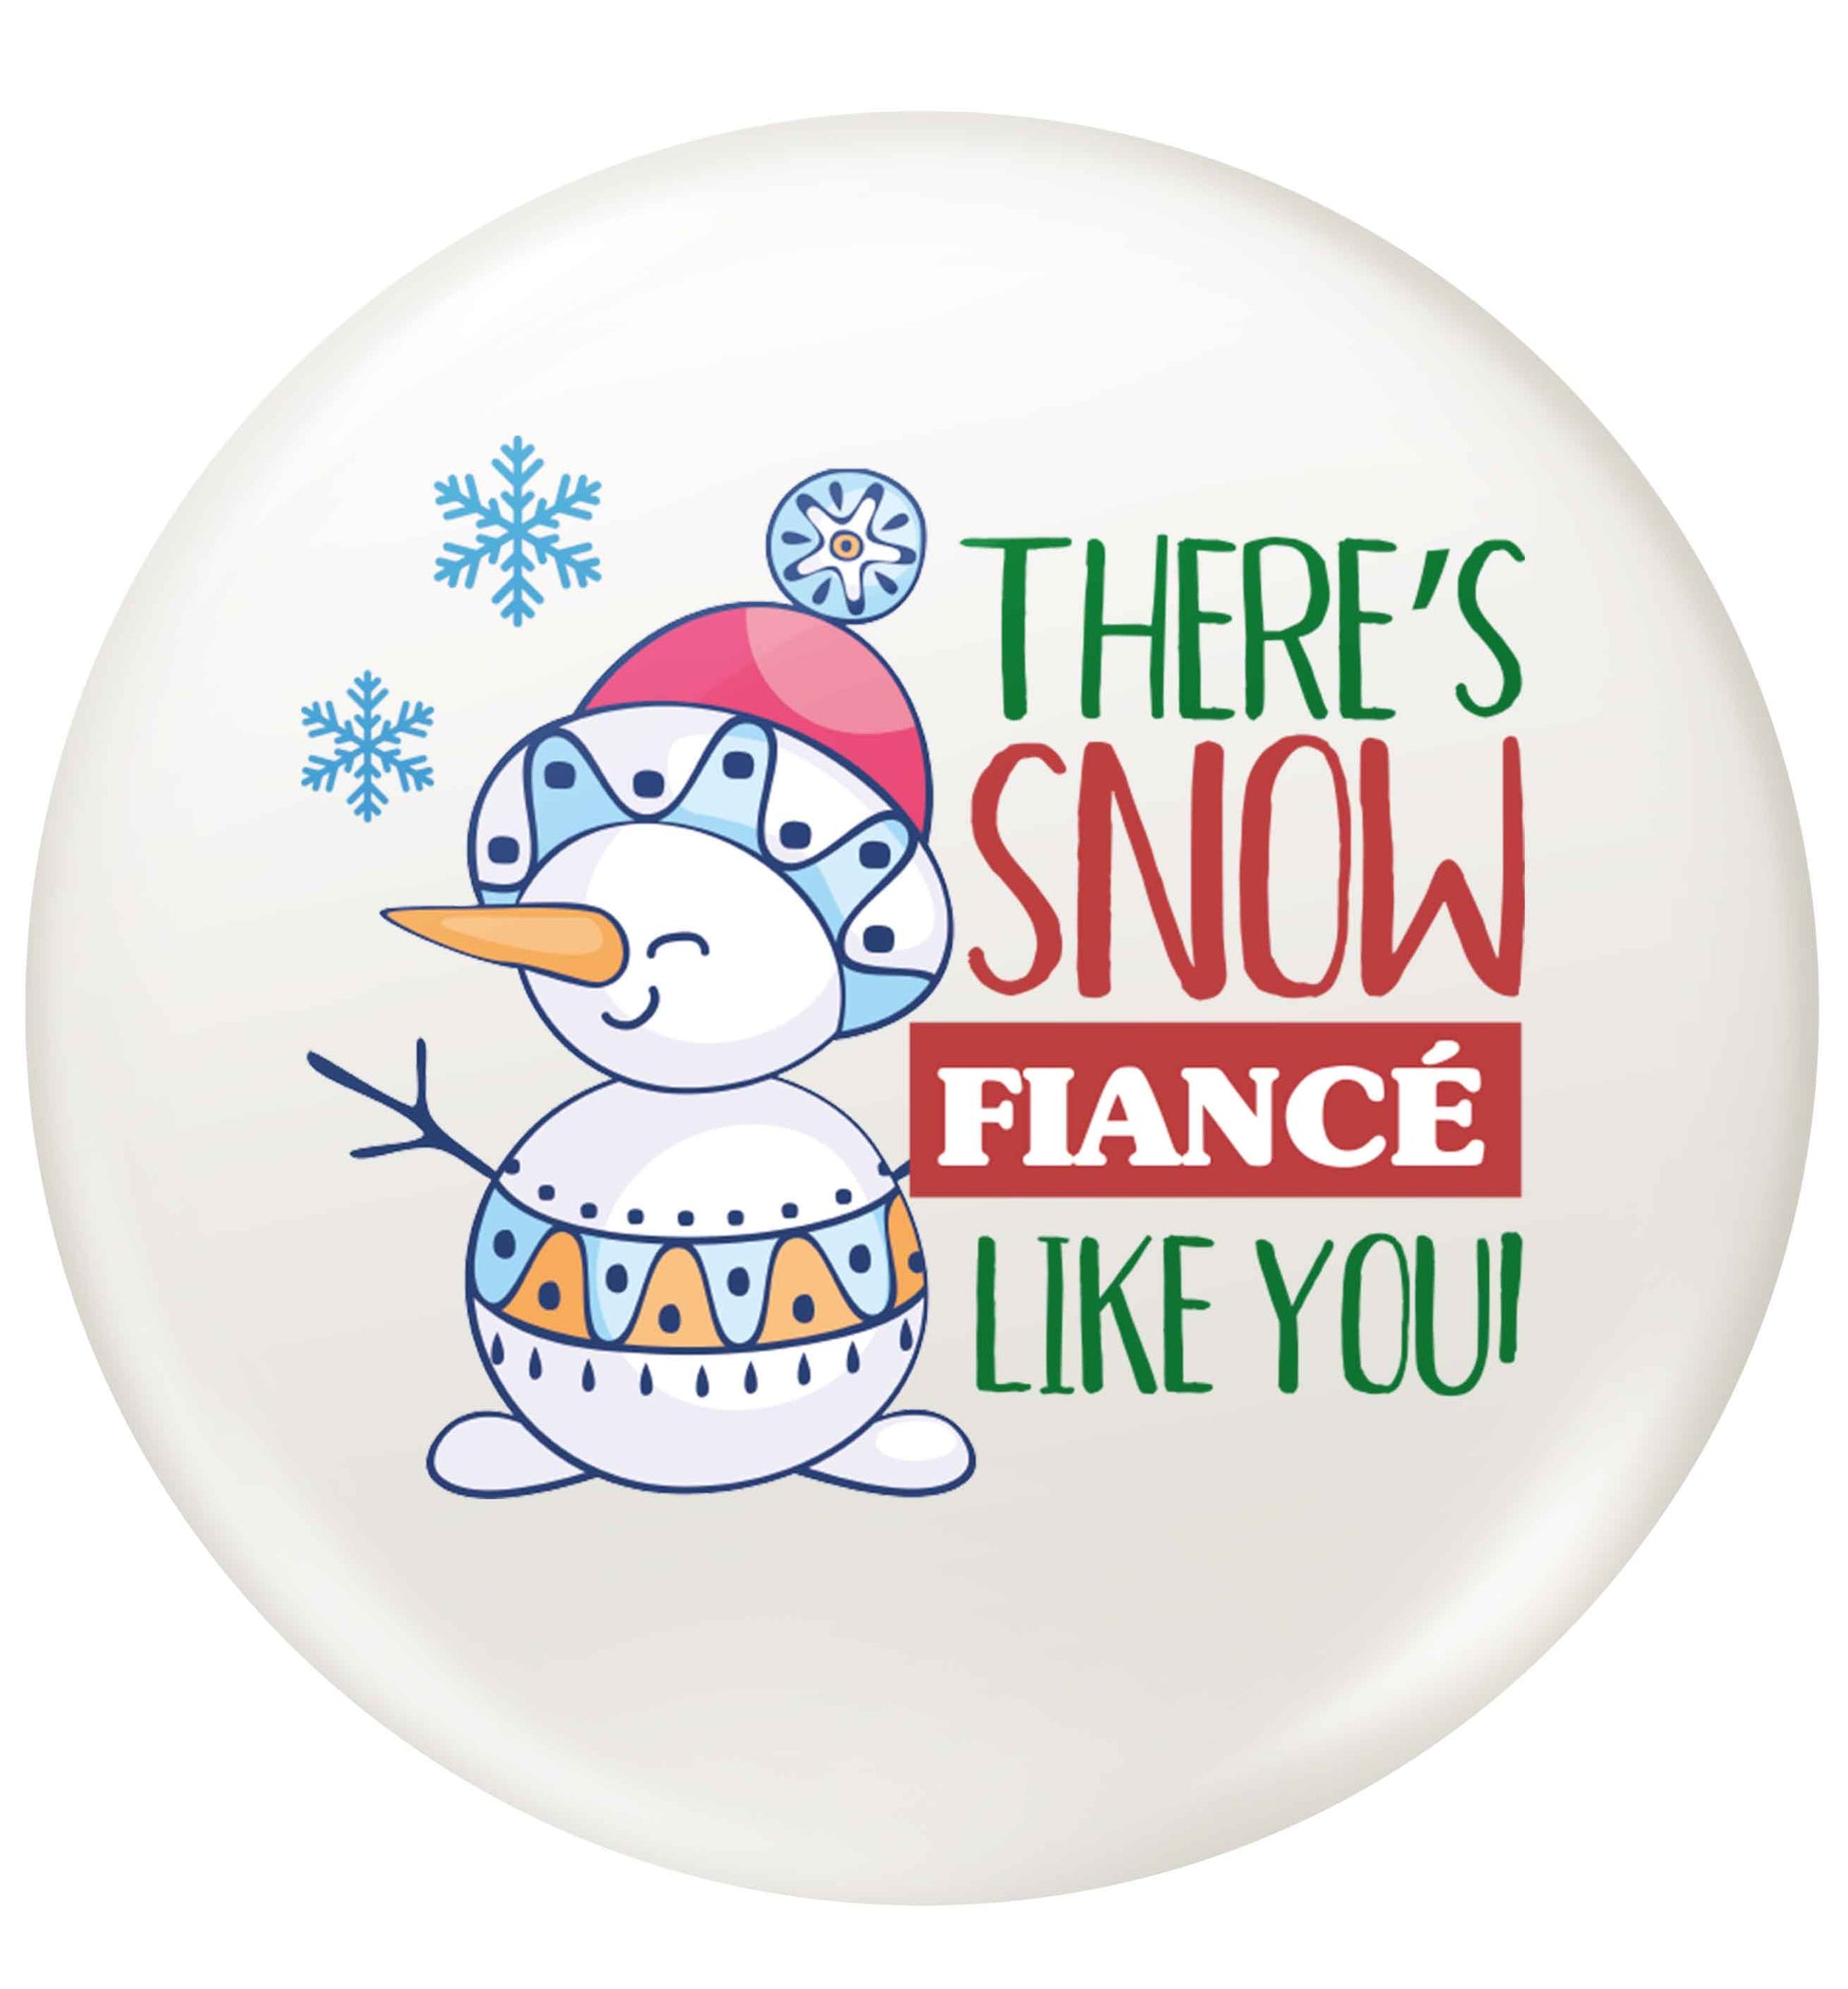 There's snow fiance like you small 25mm Pin badge